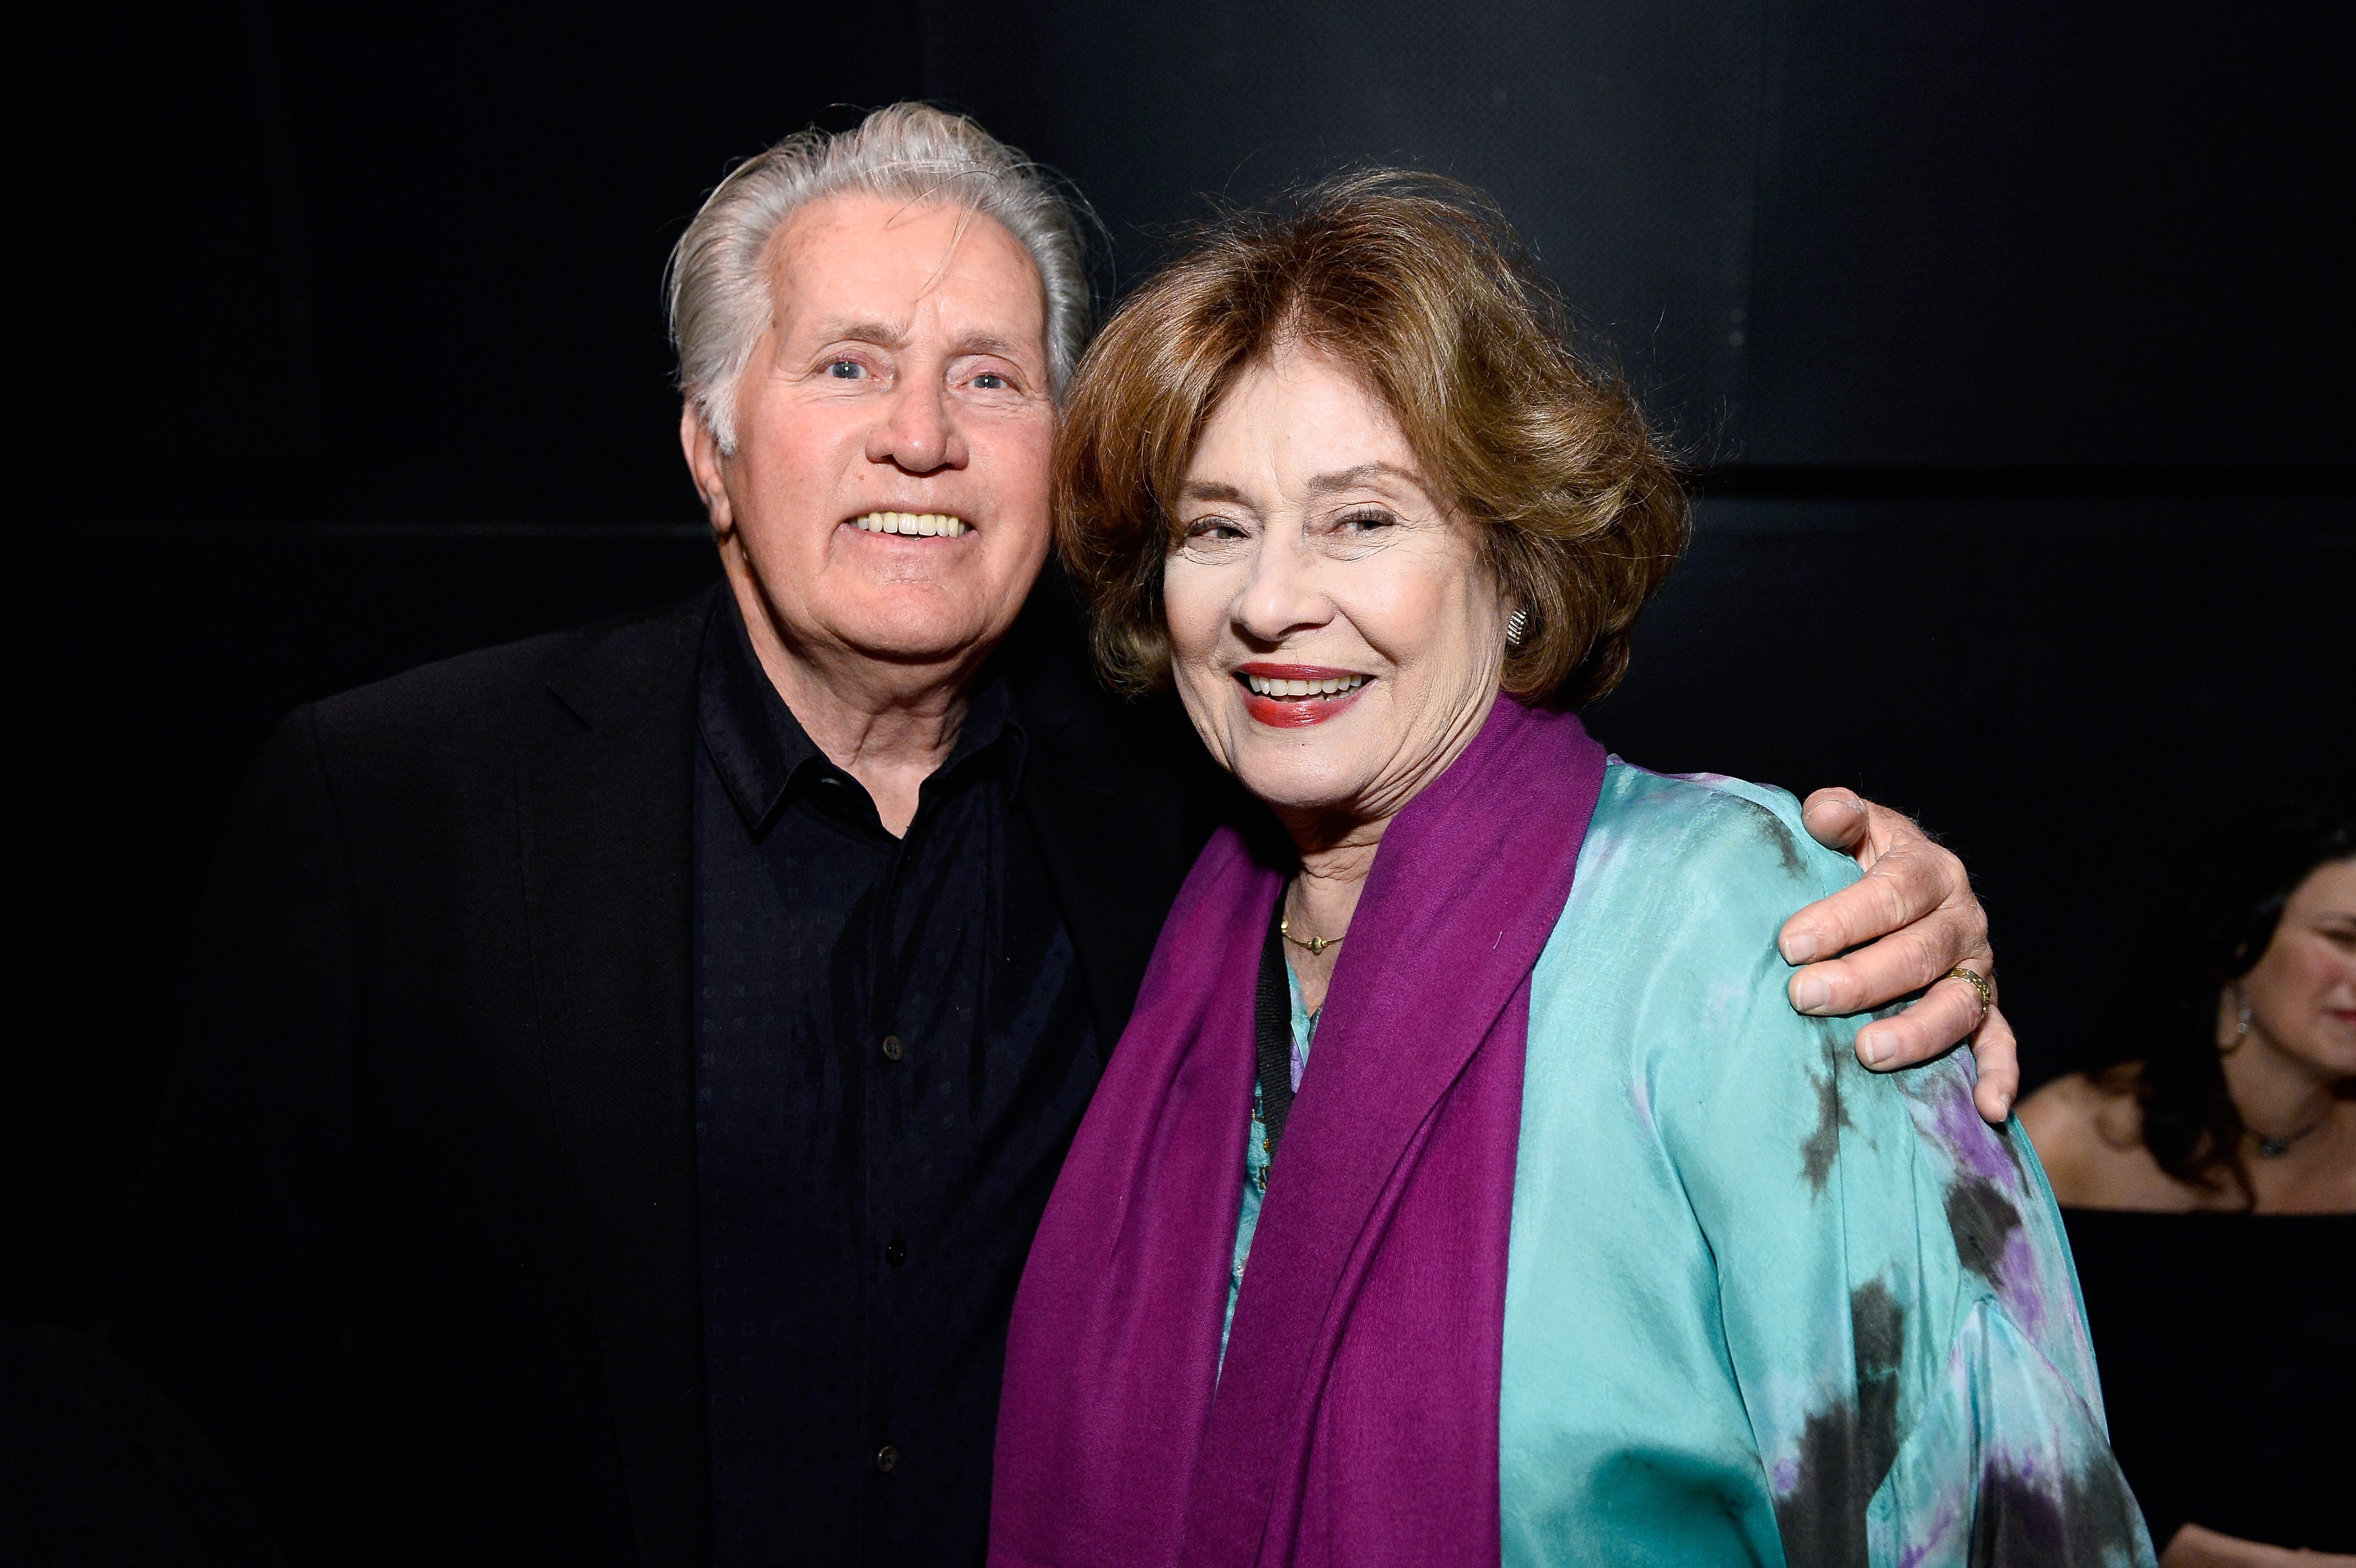 Martin Sheen and his wife Janet Sheen in California in 2017. | Source: Getty Images 